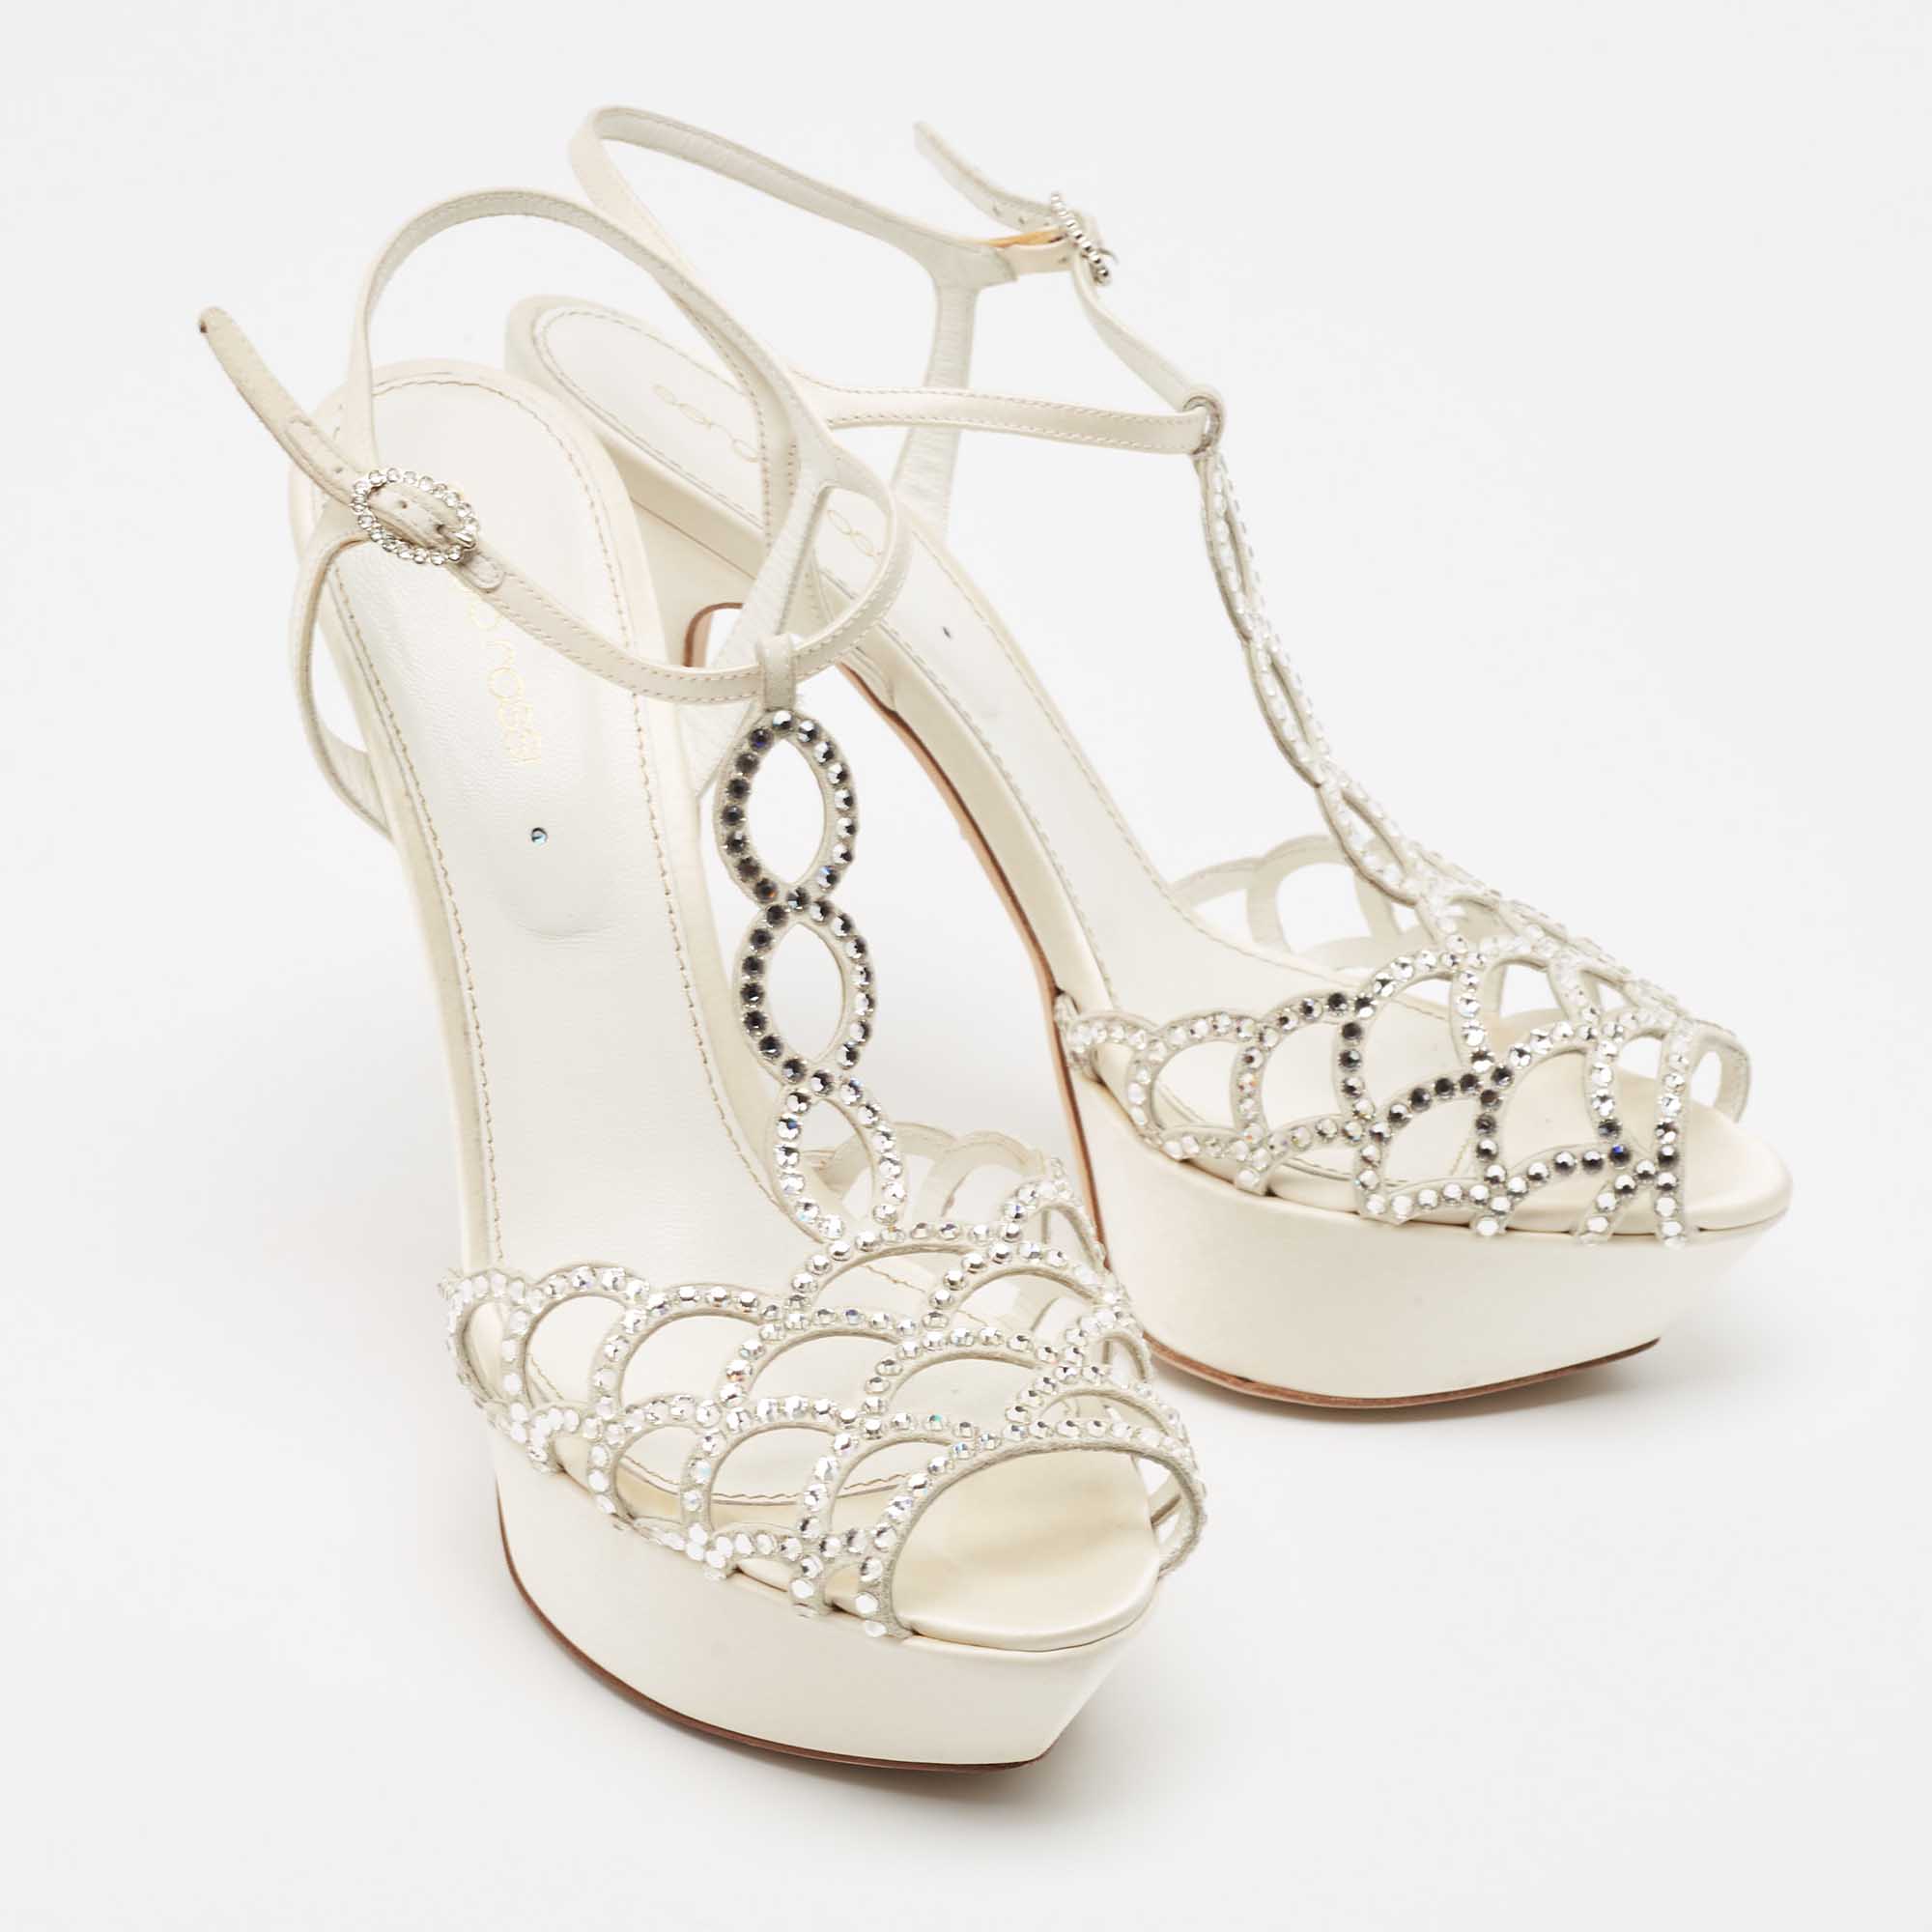 Sergio Rossi White Satin And Suede Crystal Embellished Strappy Scalloped Platform Sandals Size 40